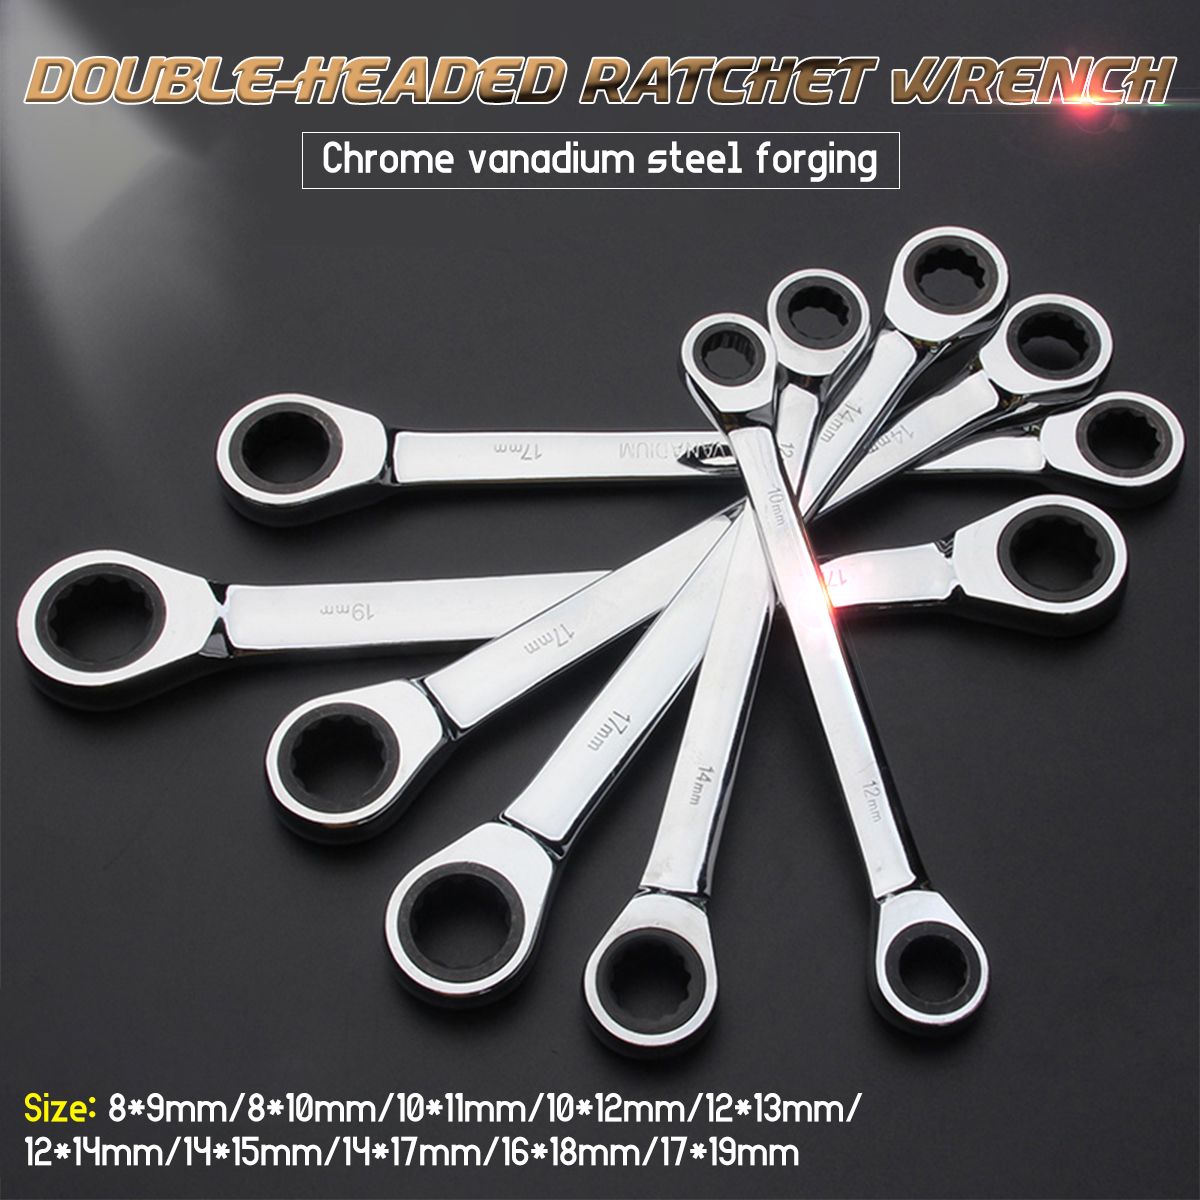 8-19mm-Steel-Metric-Fixed-Head-Ratchet-Spanner-Gear-Wrench-Double-End-Ring-Tool-1528692